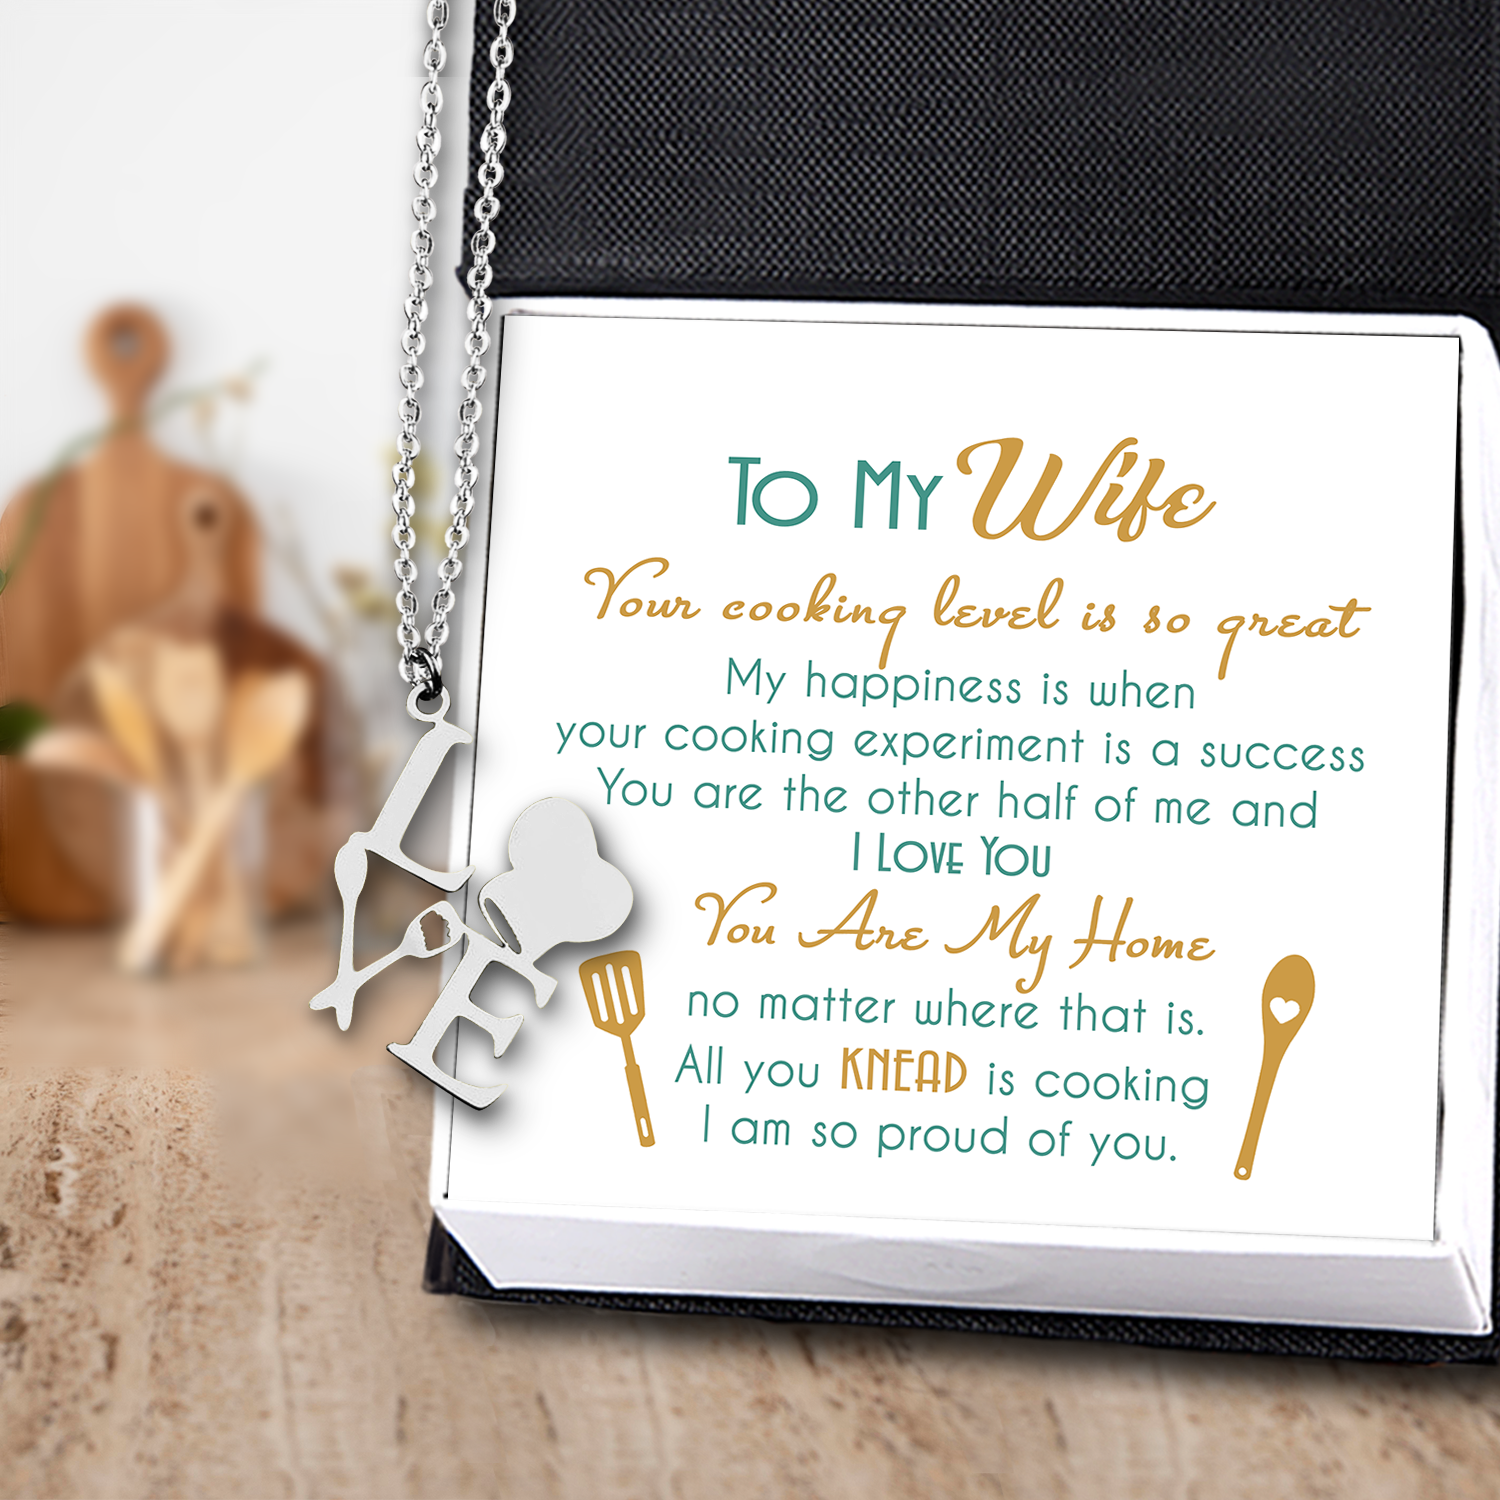 Love Cooking Necklace - Cooking - To My Wife - You Are My Home - Ukgngf15003